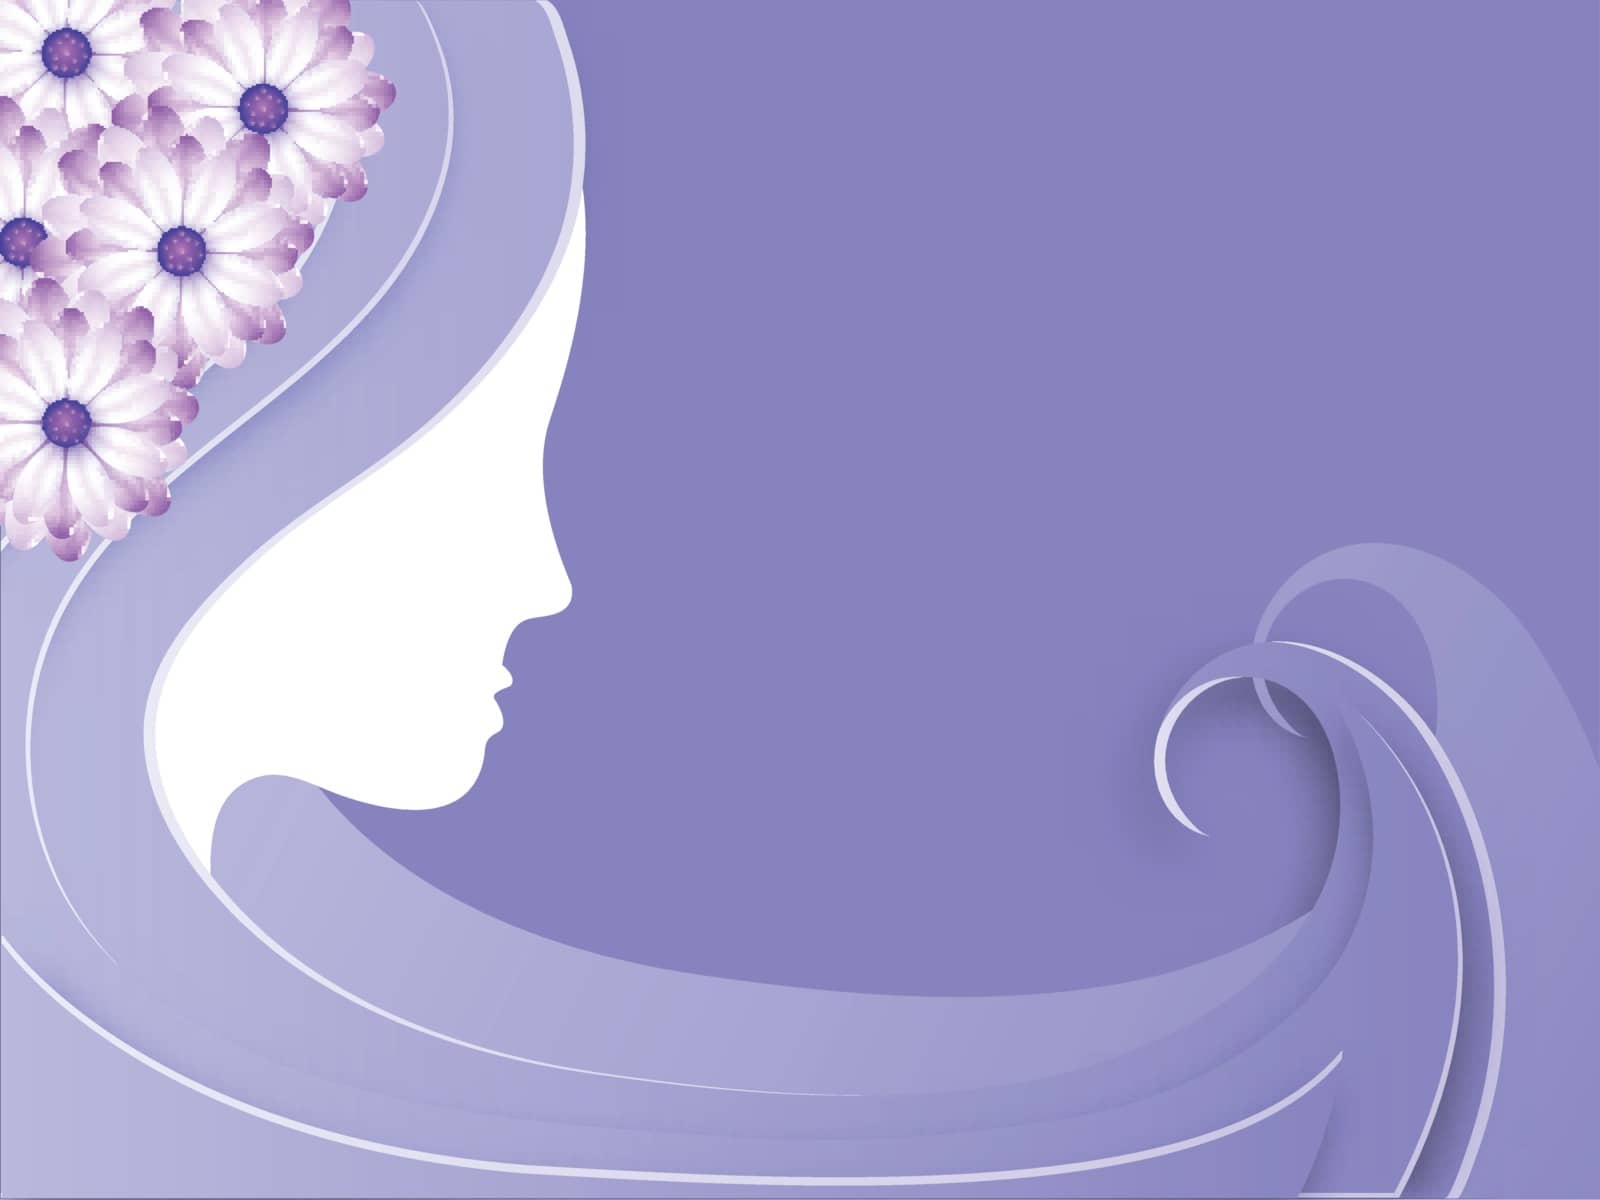 Paper cut style woman face on purple background for women's day celebration poster or banner design.